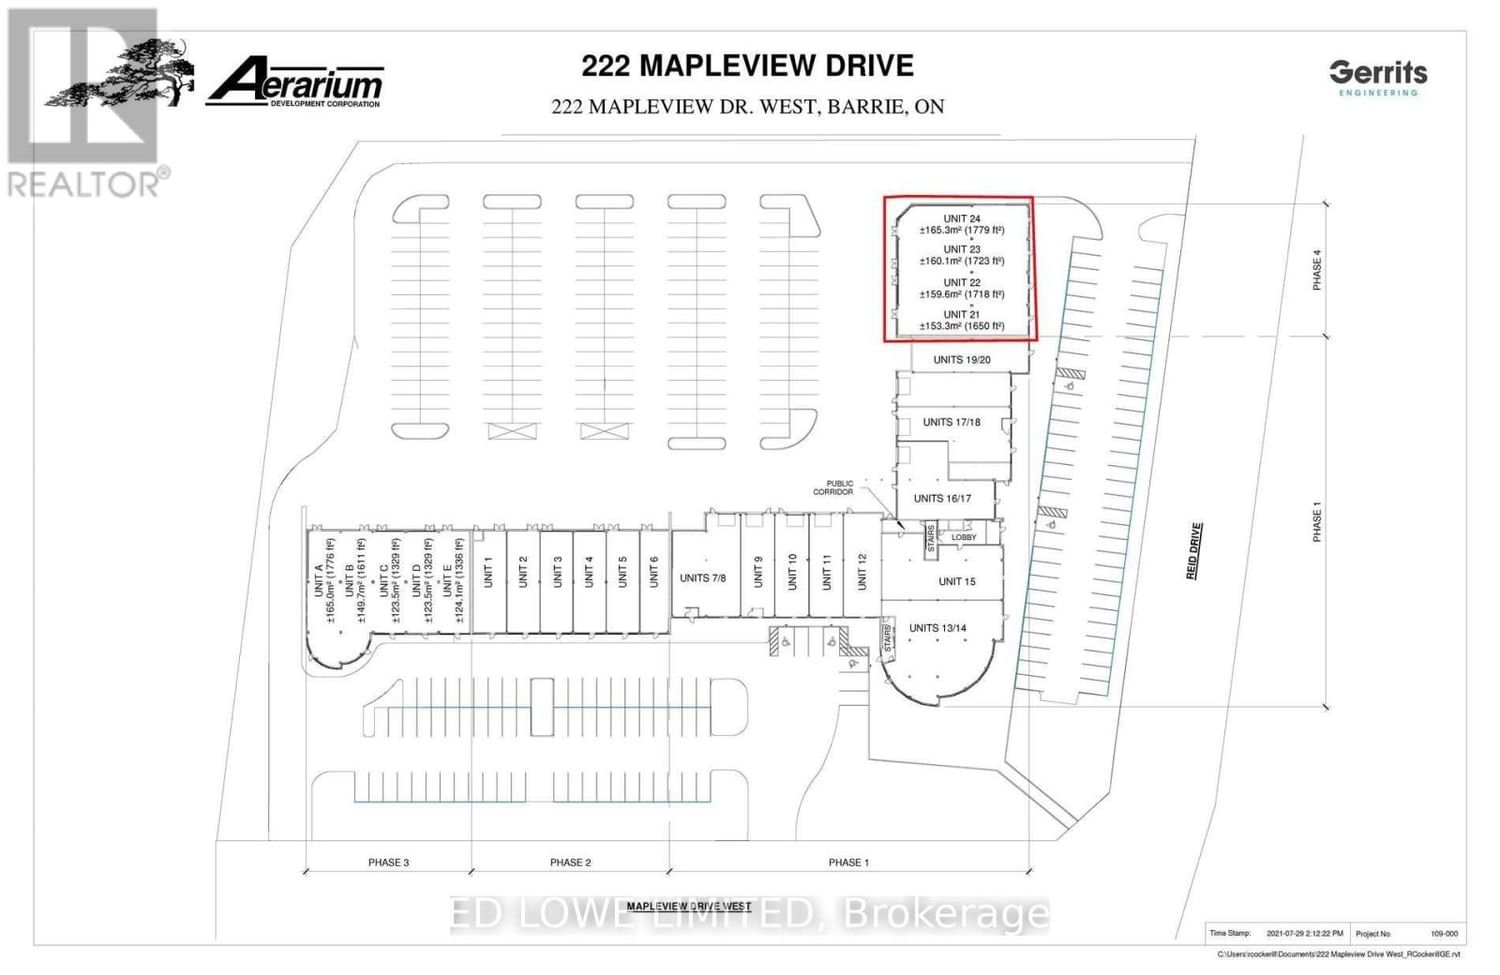 21 & 22 - 222 MAPLEVIEW DRIVE W Image 2